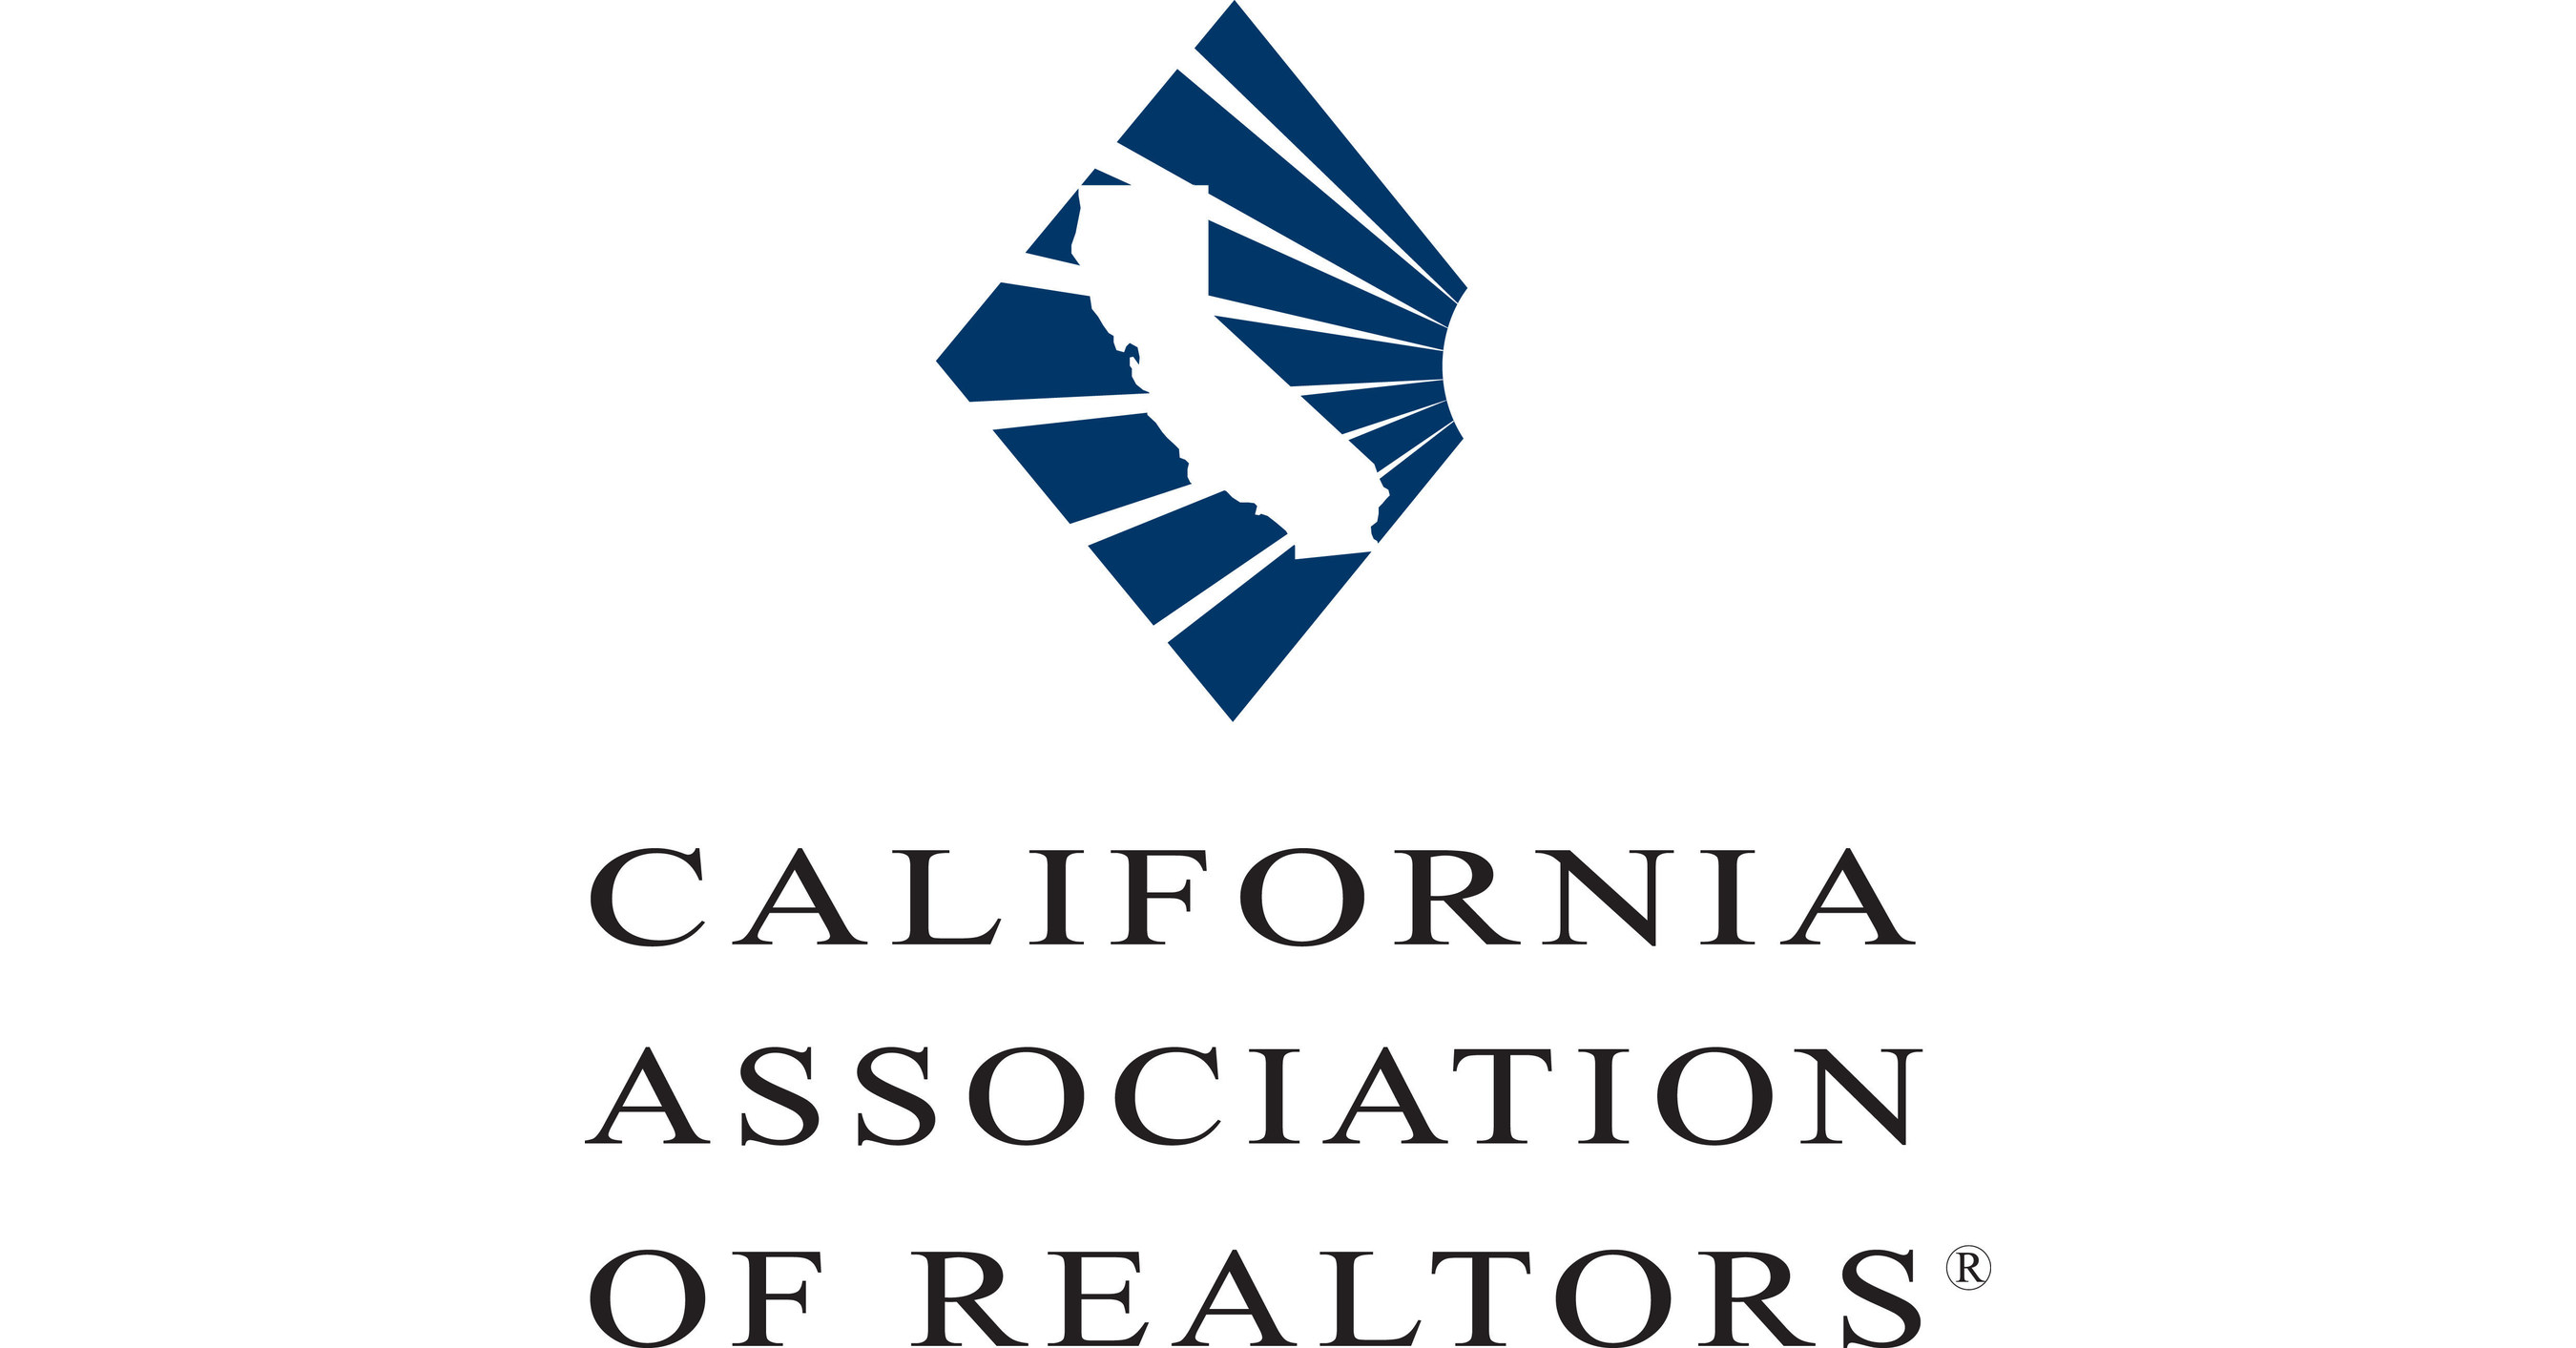 California home sales lose steam in March while median home price hits seven-month high, C.A.R. reports